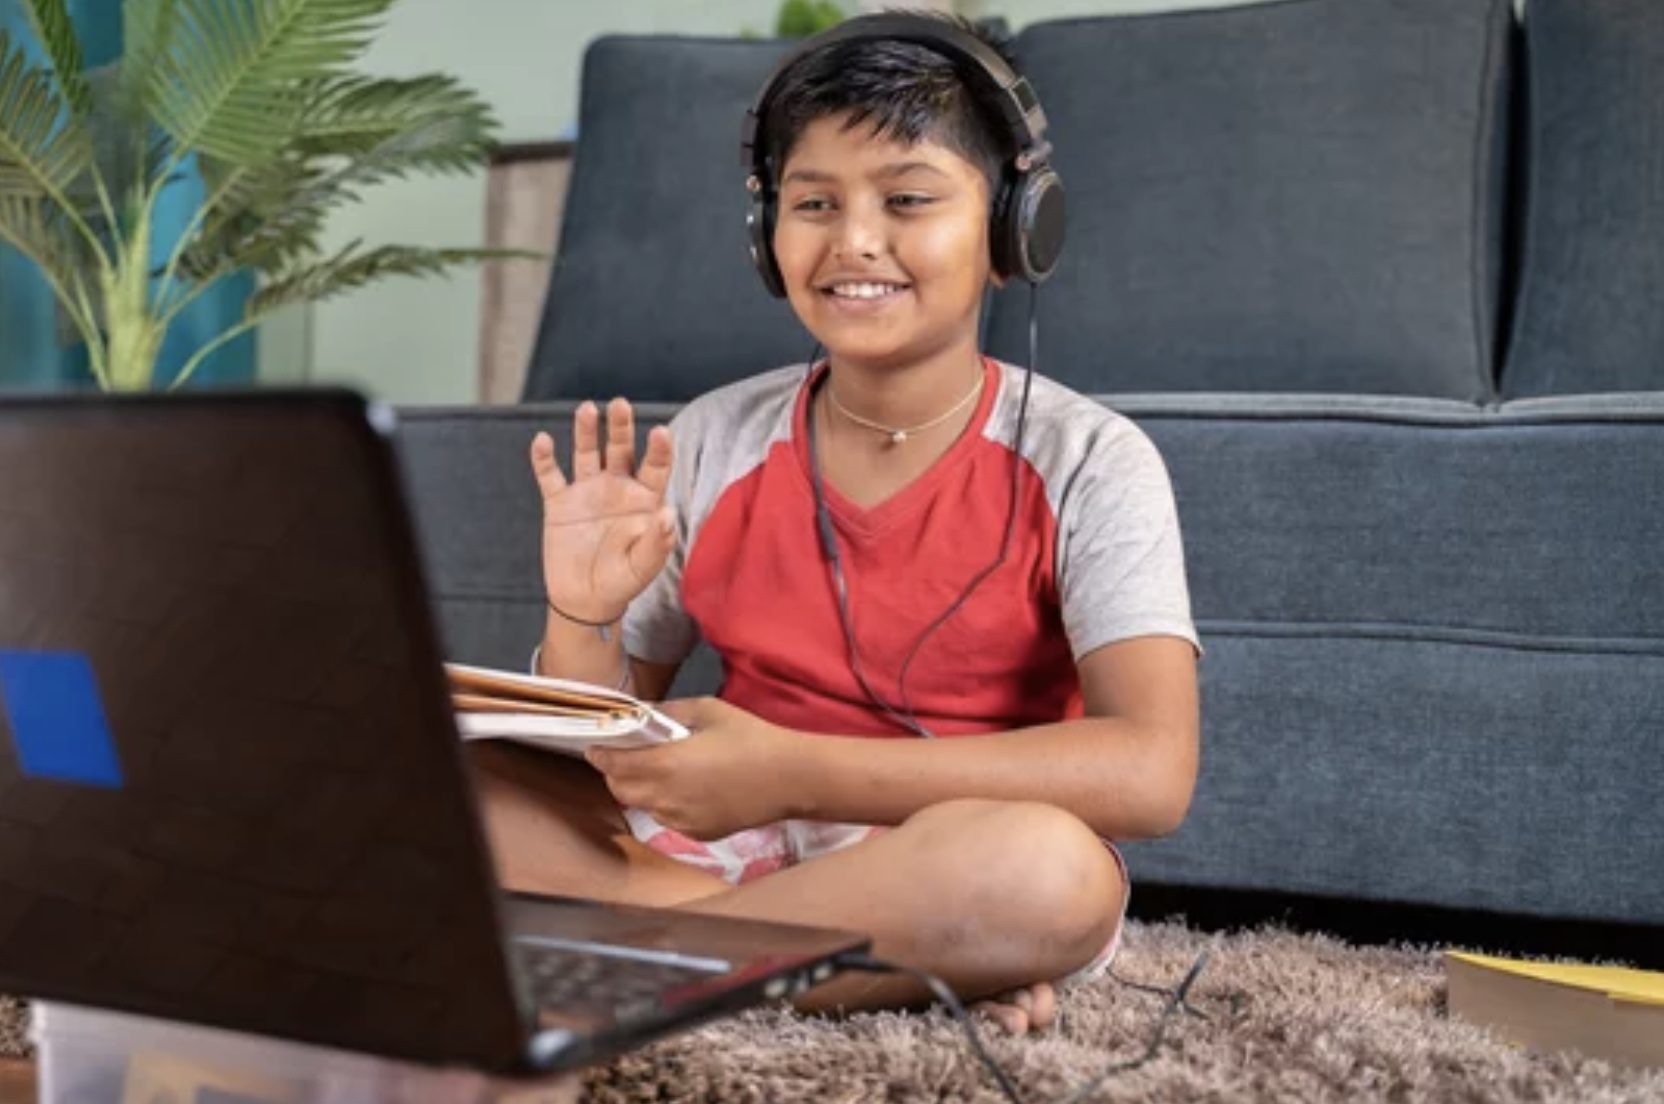 A smiling child with headphones waves at their virtual class, embracing remote learning